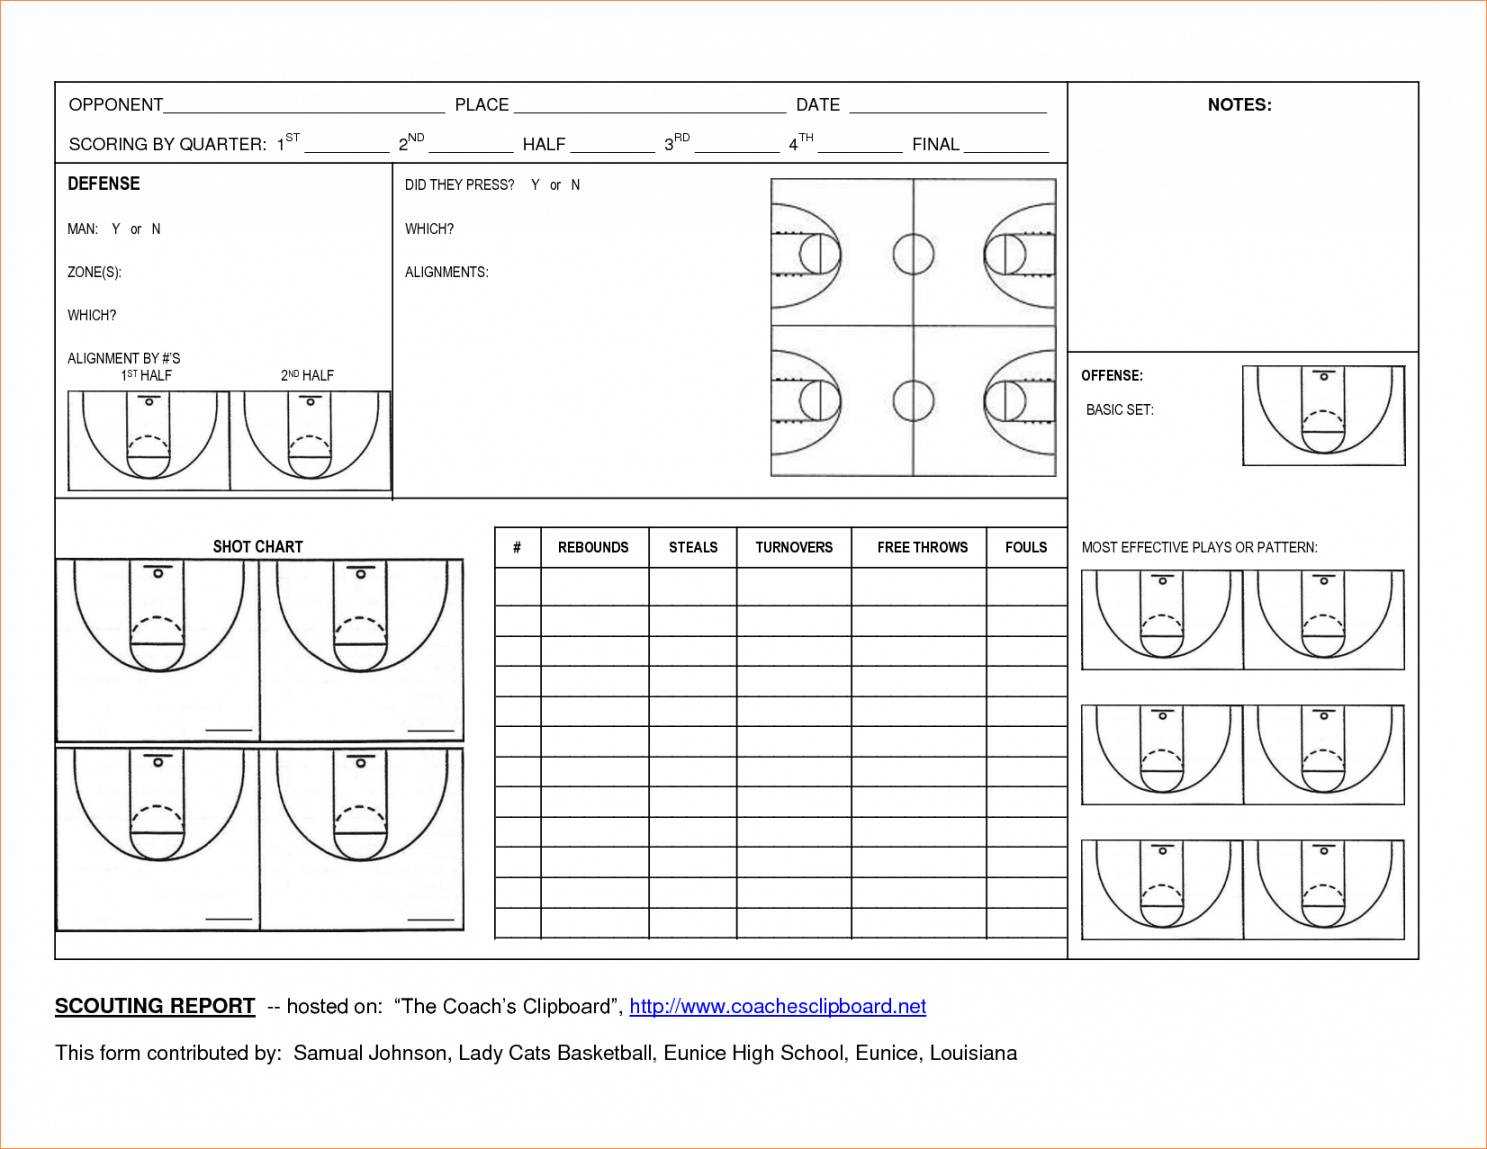 Editable Basketball Scouting Report Template Dltemplates Throughout Scouting Report Basketball Template